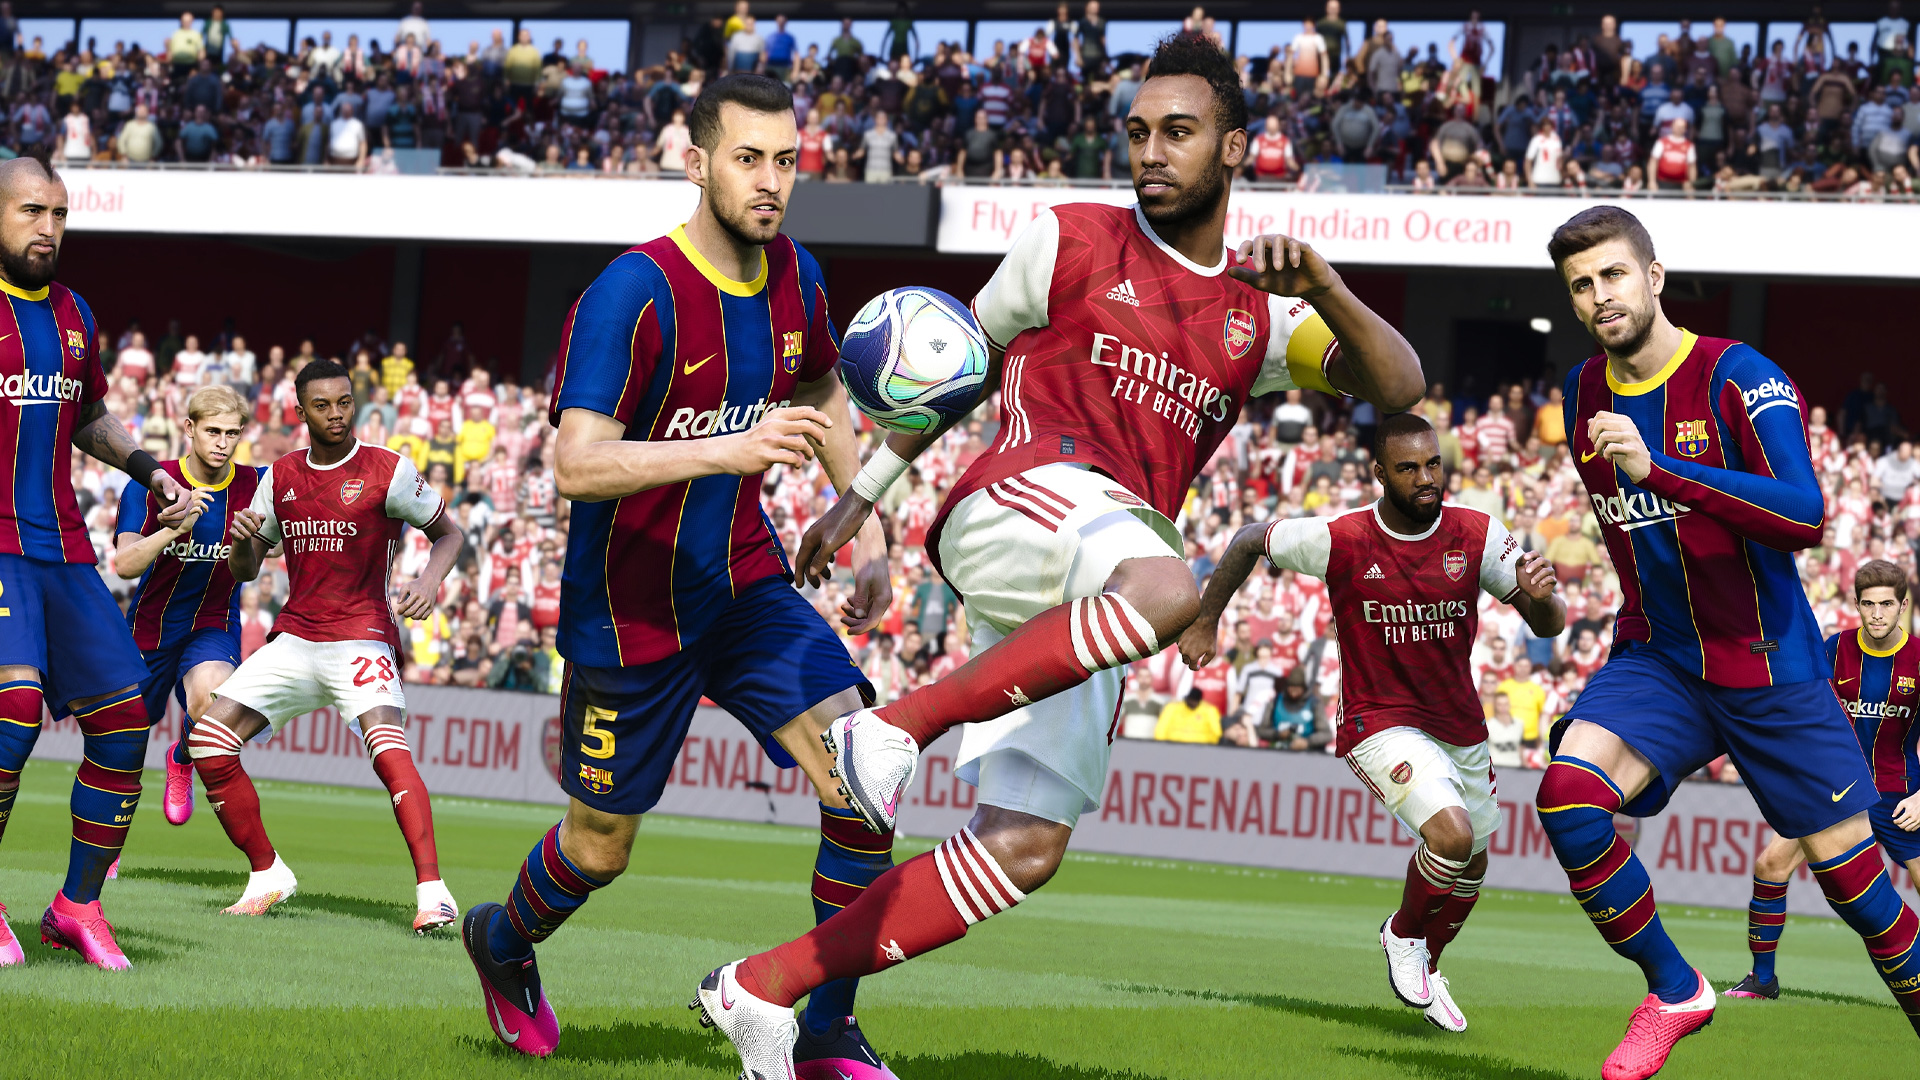 Pierre-Emerick Aubameyang on the ball in PES 2021